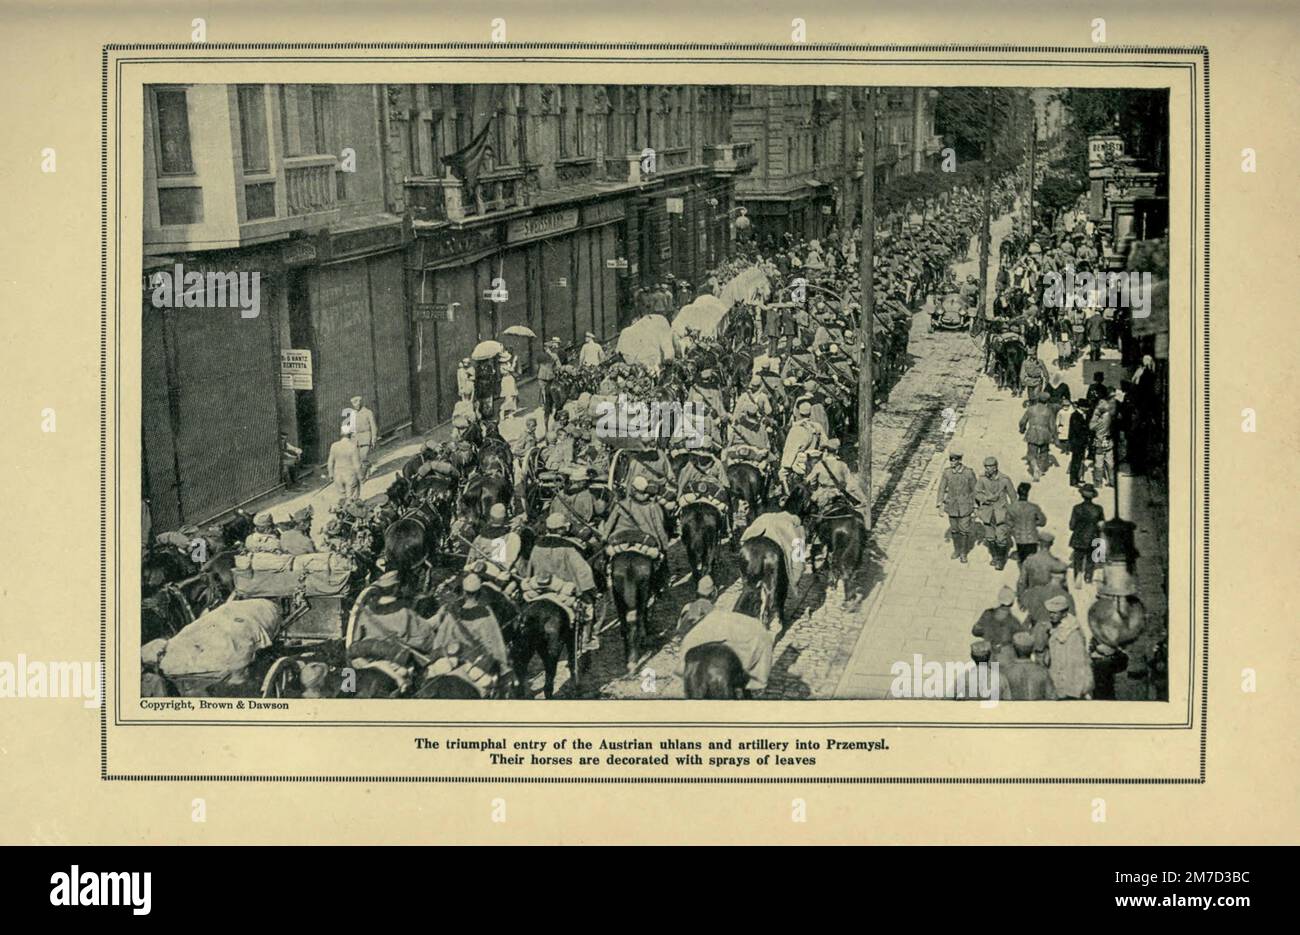 Triumphal Entry of Austrians into Przemysl (Poland) from the book The story of the great war; the complete historical records of events to date DIPLOMATIC AND STATE PAPERS by Reynolds, Francis Joseph, 1867-1937; Churchill, Allen Leon; Miller, Francis Trevelyan, 1877-1959; Wood, Leonard, 1860-1927; Knight, Austin Melvin, 1854-1927; Palmer, Frederick, 1873-1958; Simonds, Frank Herbert, 1878-; Ruhl, Arthur Brown, 1876-  Volume III Published 1920 Stock Photo